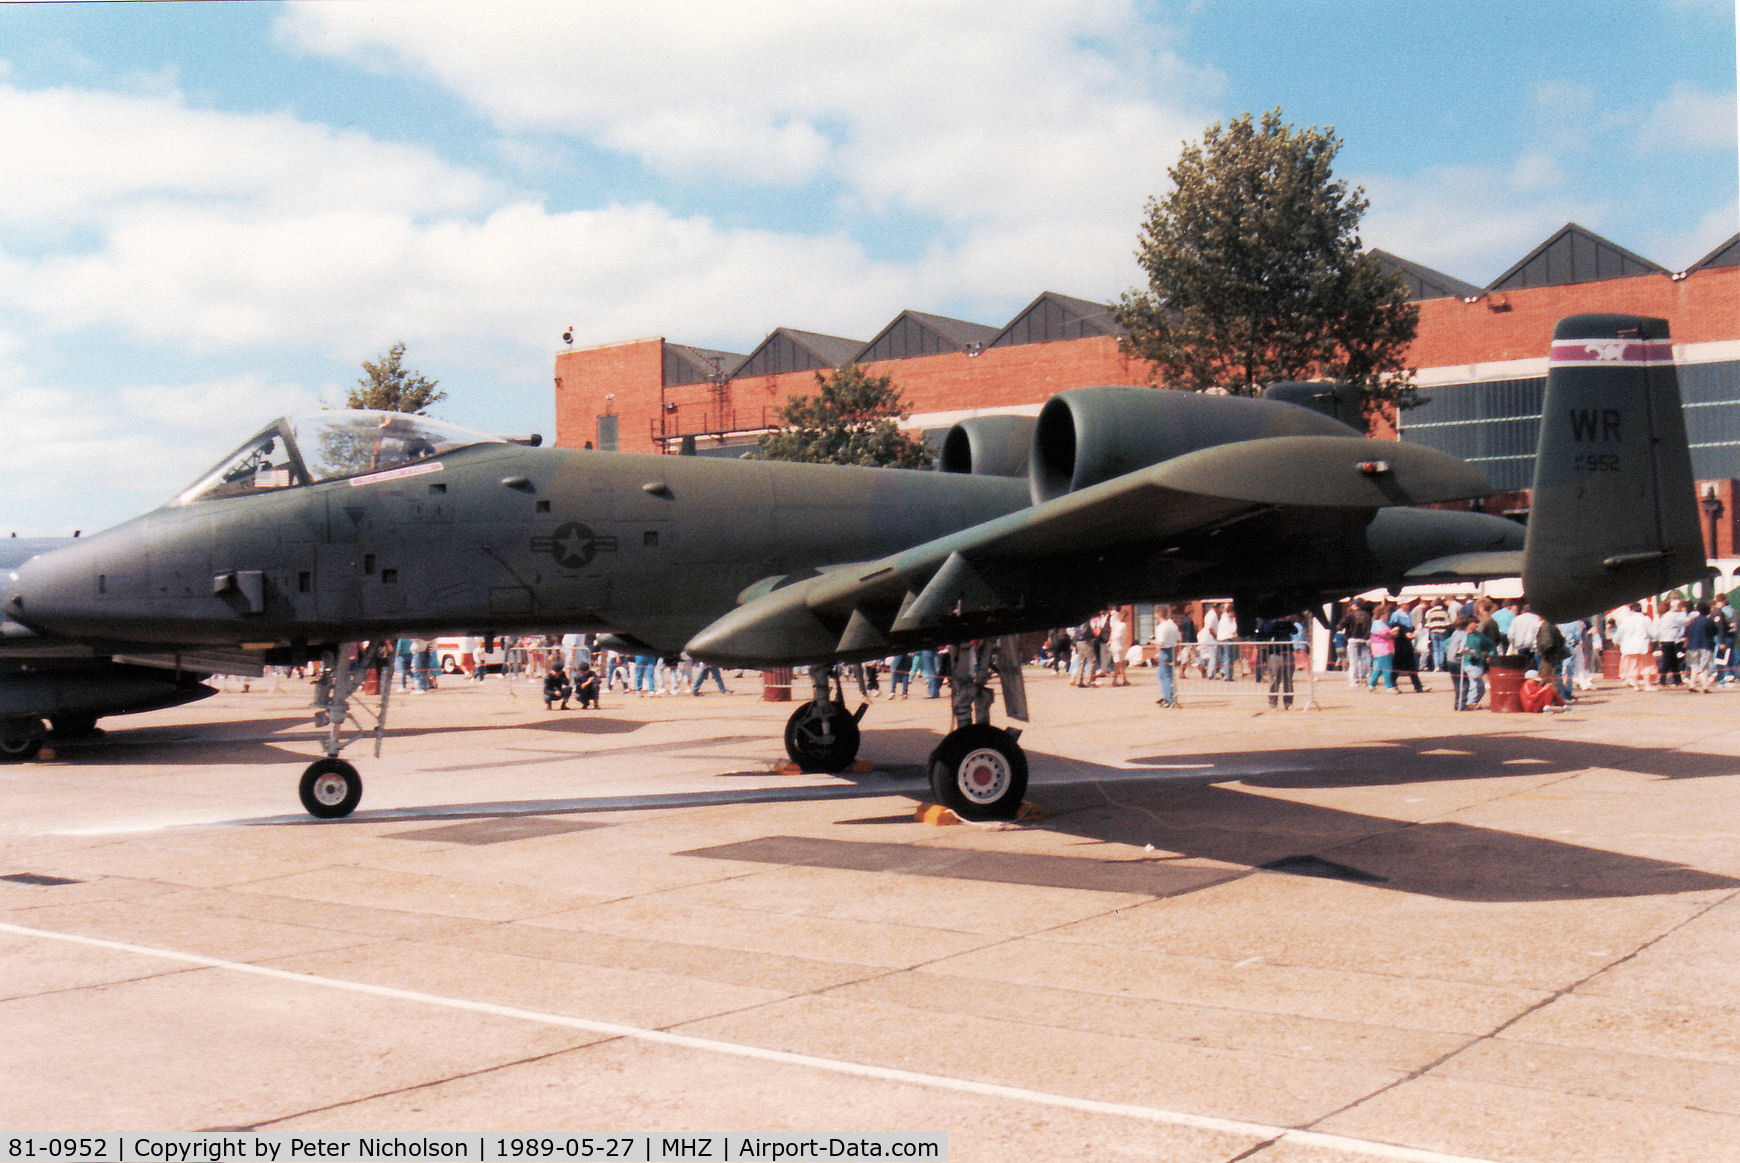 81-0952, 1981 Fairchild Republic A-10A Thunderbolt II C/N A10-0647, A-10A Thunderbolt of 510th Tactical Fighter Squadron/81st Tactical Fighter Wing in the static park at the 1989 RAF Mildenhall Air Fete.